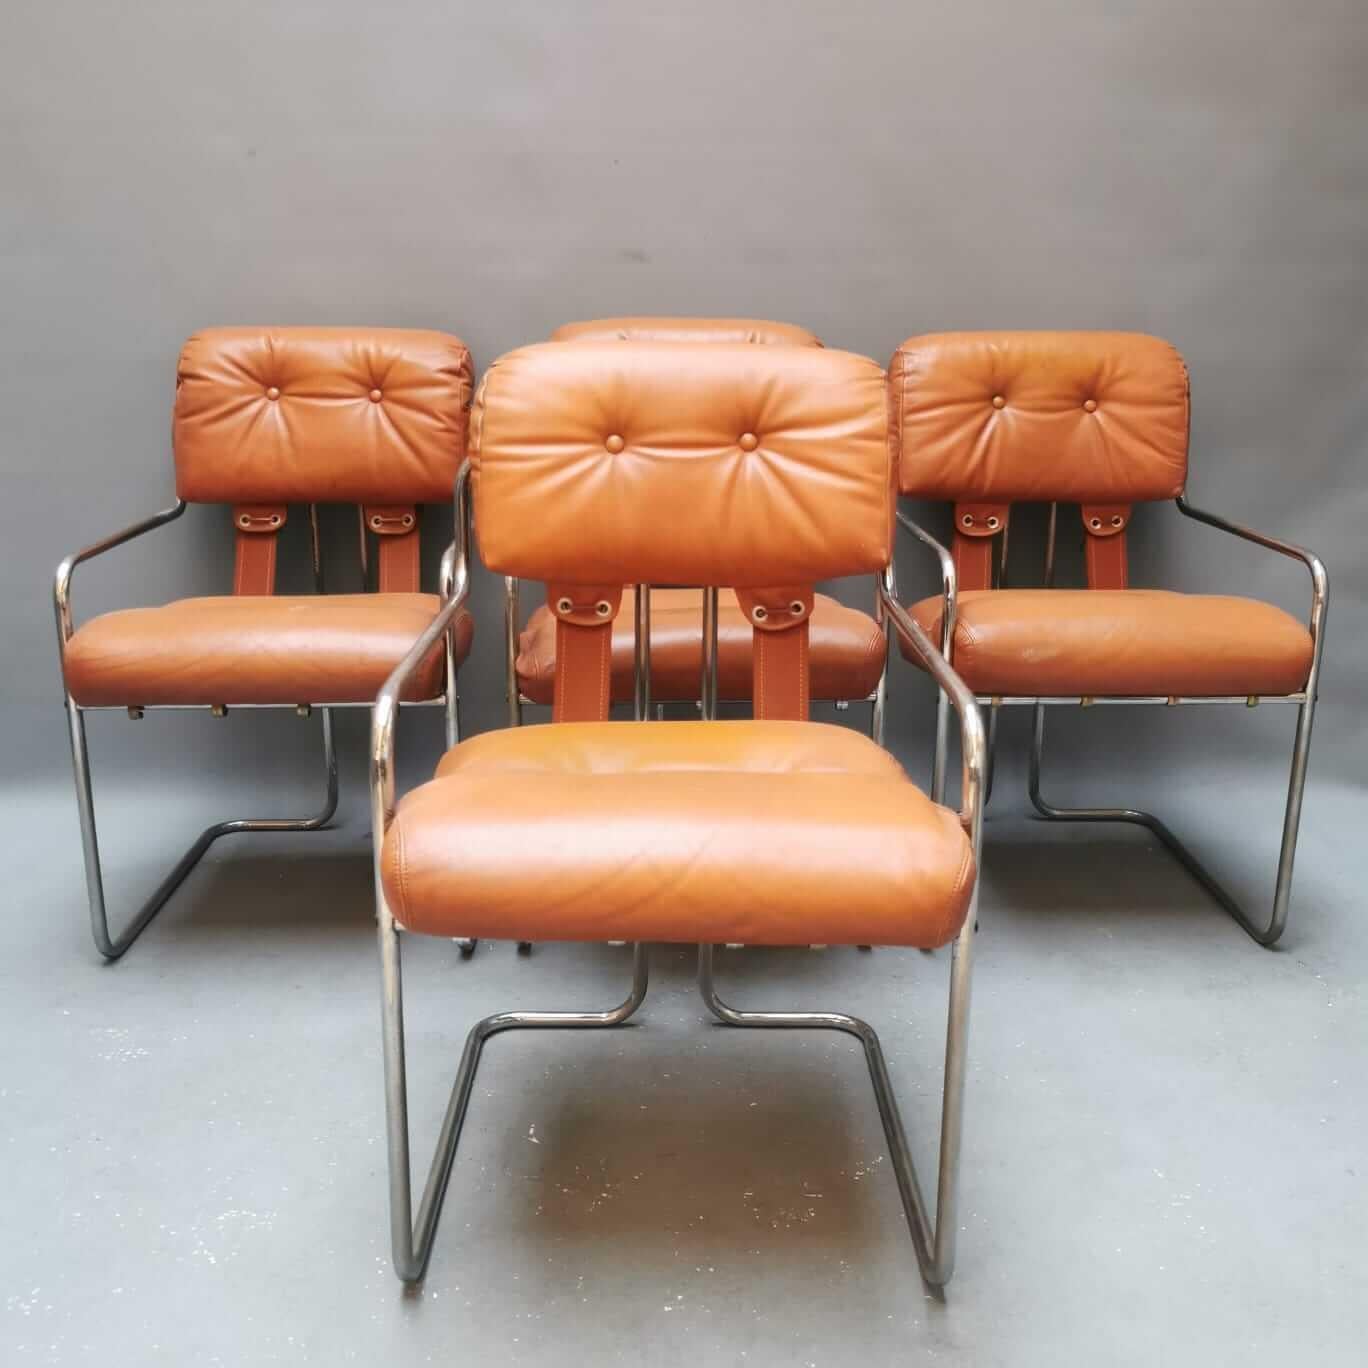 designed by architect Guido Faleschini, it revolutionized contemporary style. A chrome-plated tubular steel gives an effect of continuity in the lines and great comfort in the seating. The cushions made of leather, both of the back and seat, are